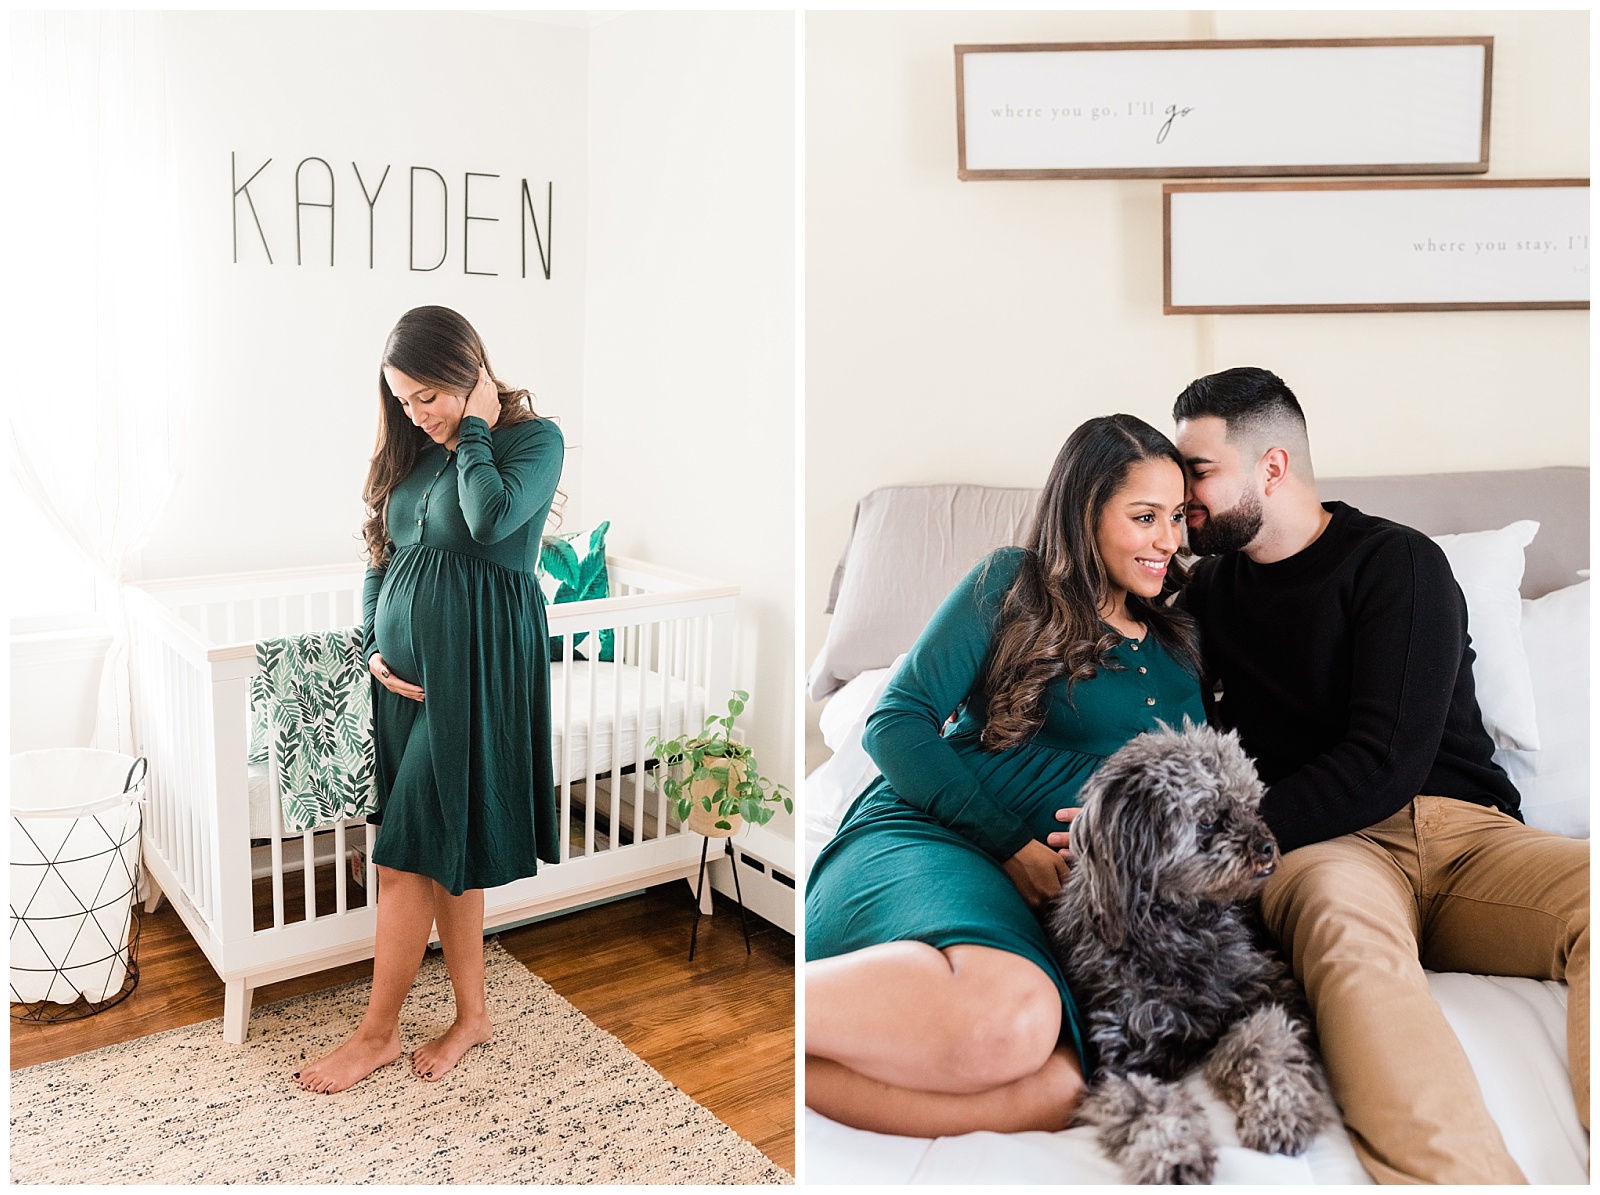 In Home Maternity Session, Nursery, Baby, New Parents, Maternity Shoot, Pregnant, Pregnancy Photos, New Jersey, Photographer, Baby Boy, Jungle Nursery, Photo, Mama-to-be, dog